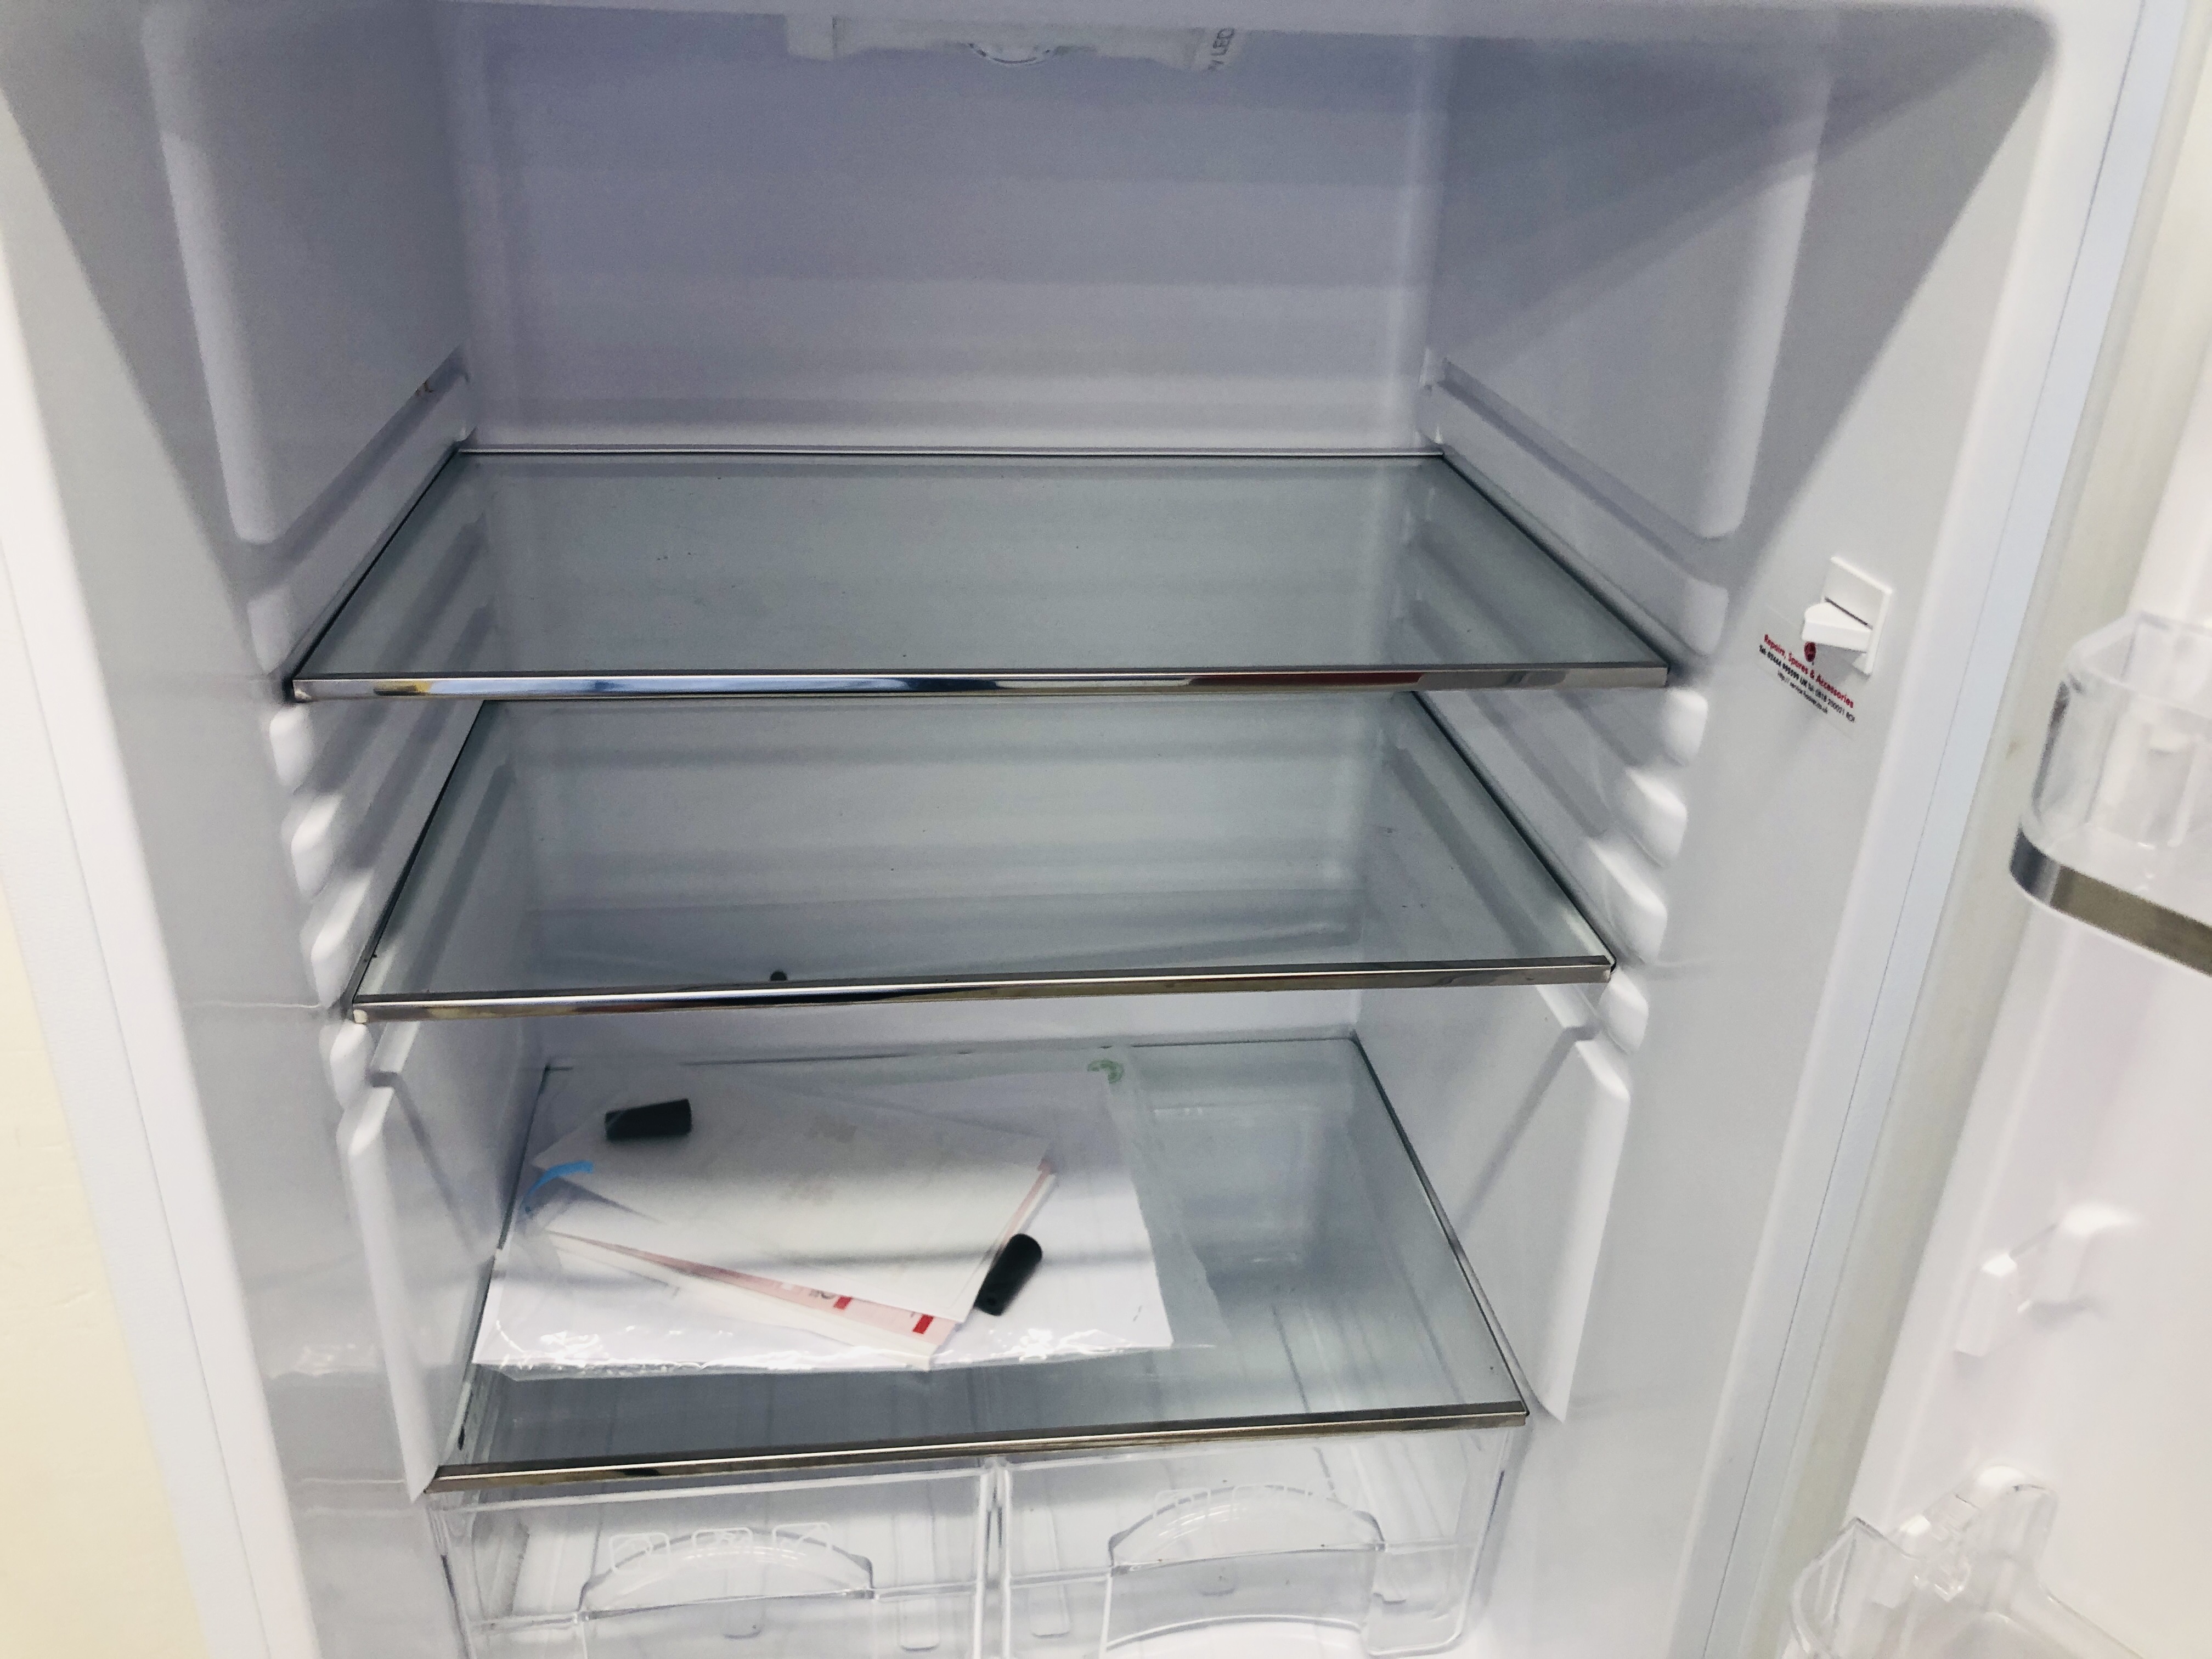 A HOOVER FRIDGE FREEZER - SOLD AS SEEN - Image 4 of 8